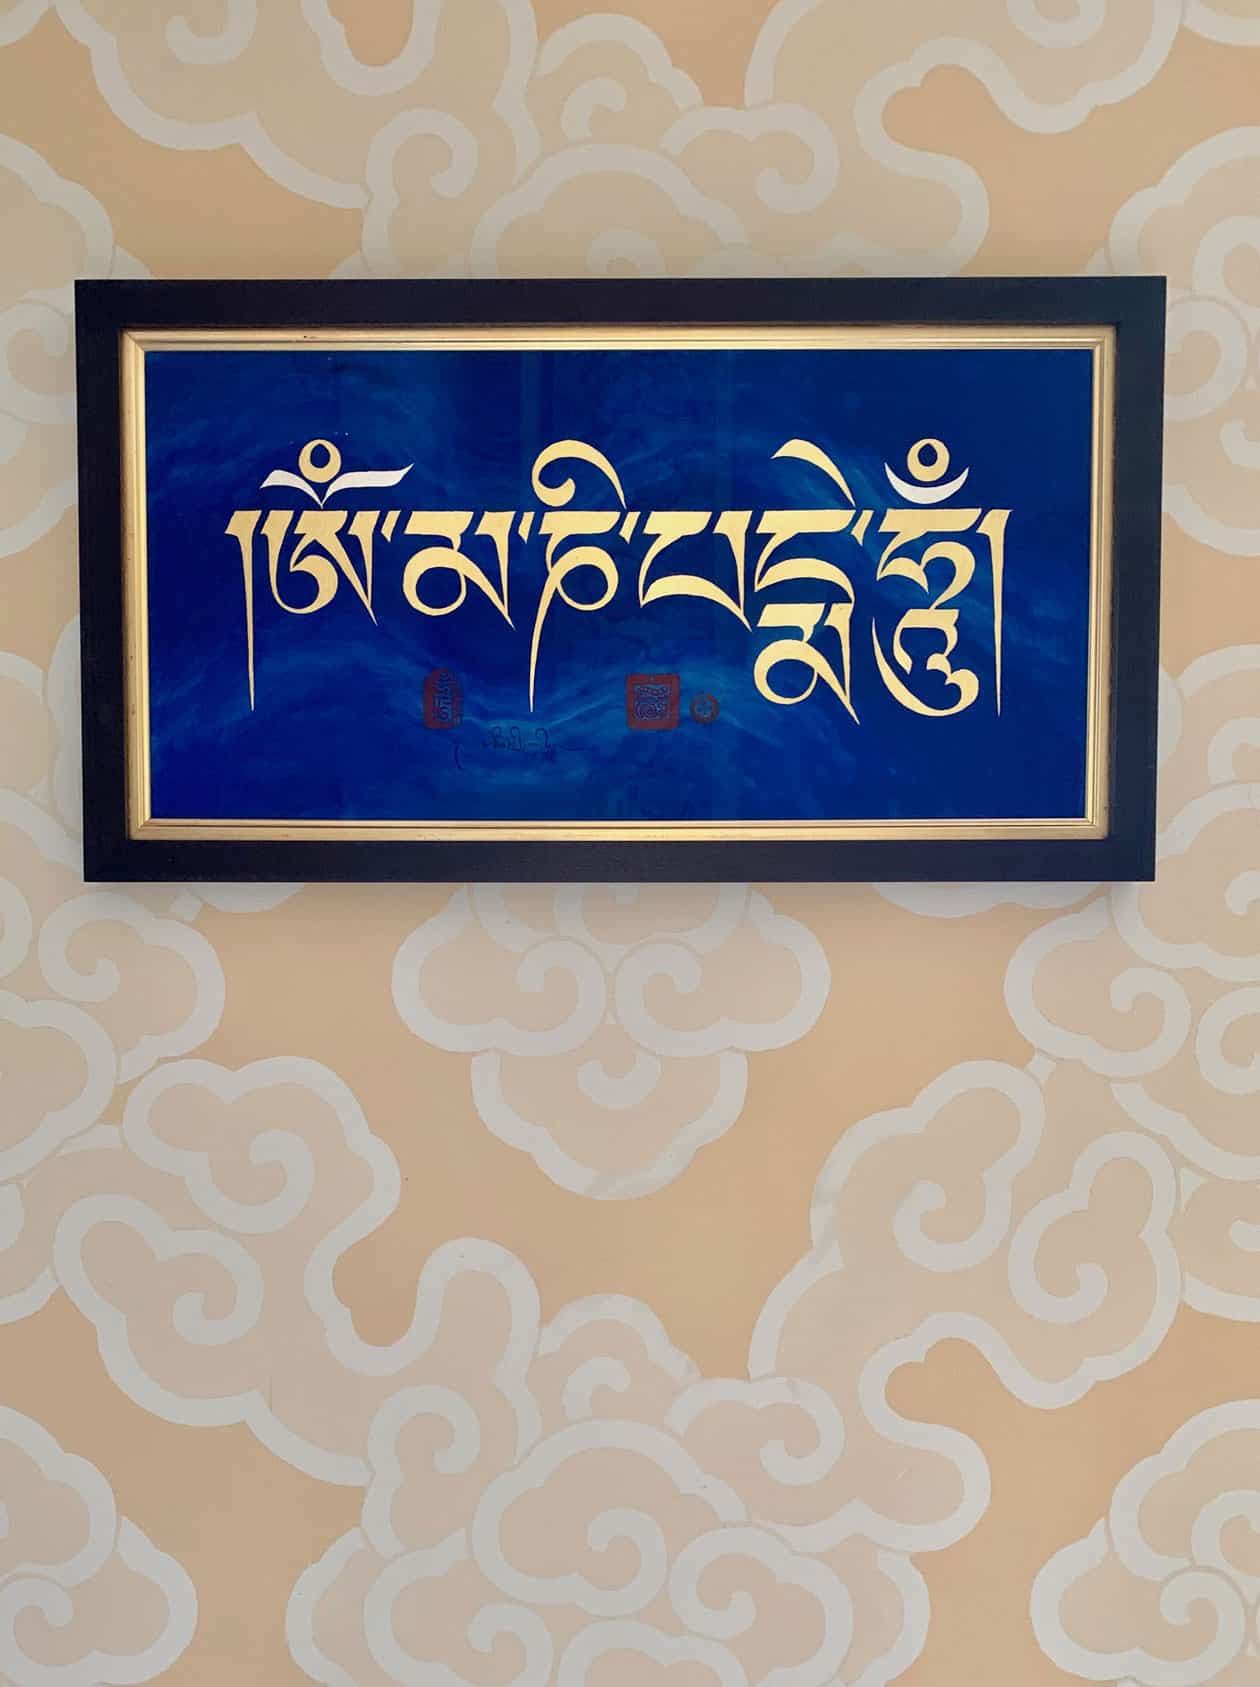 Tibetan Calligraphy follow-up course in Brussels